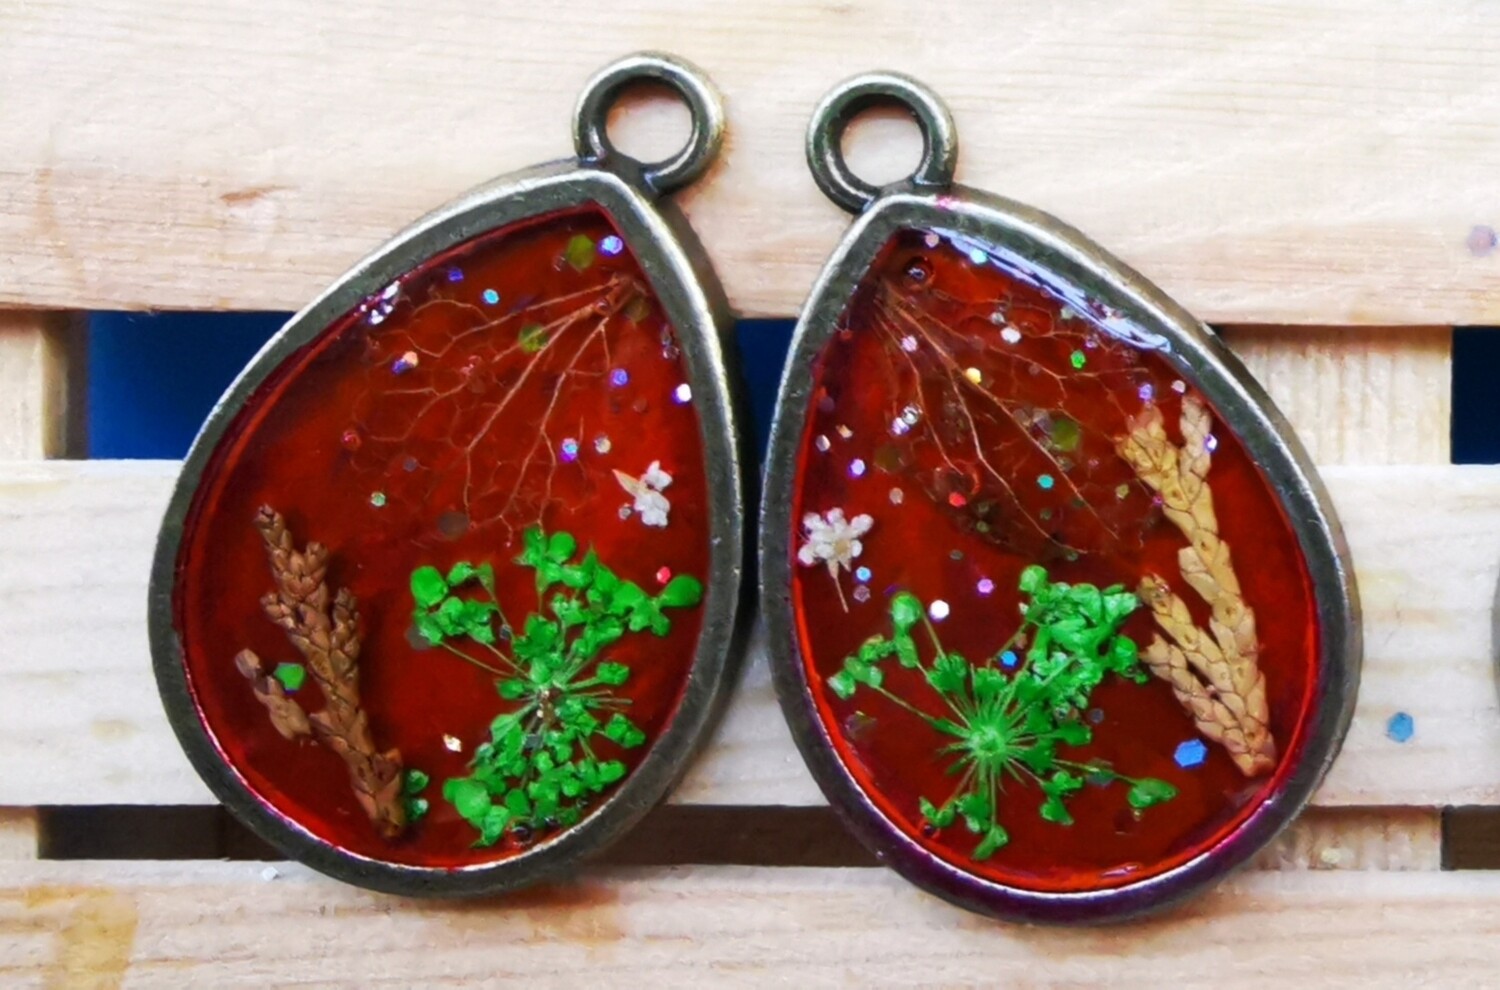 Red and green earrings